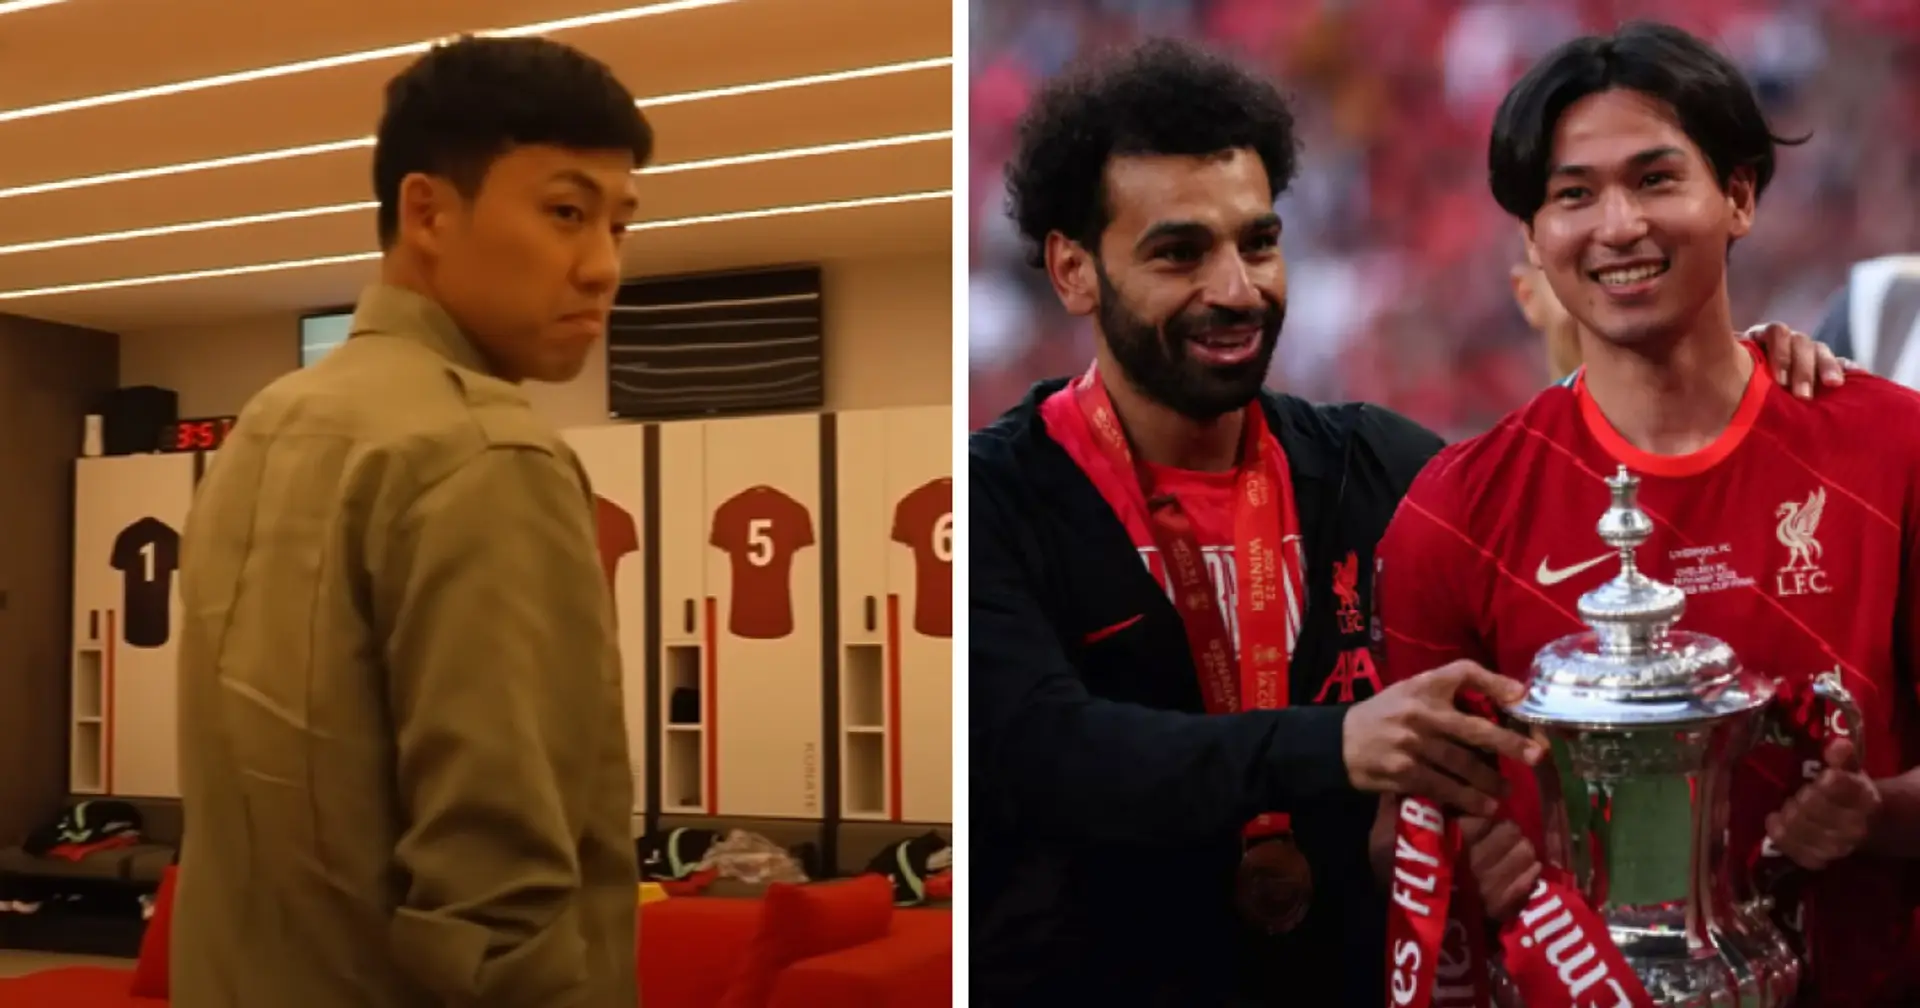 'He didn’t give me specific advice': Endo reveals he got in touch with Minamino after move to Liverpool